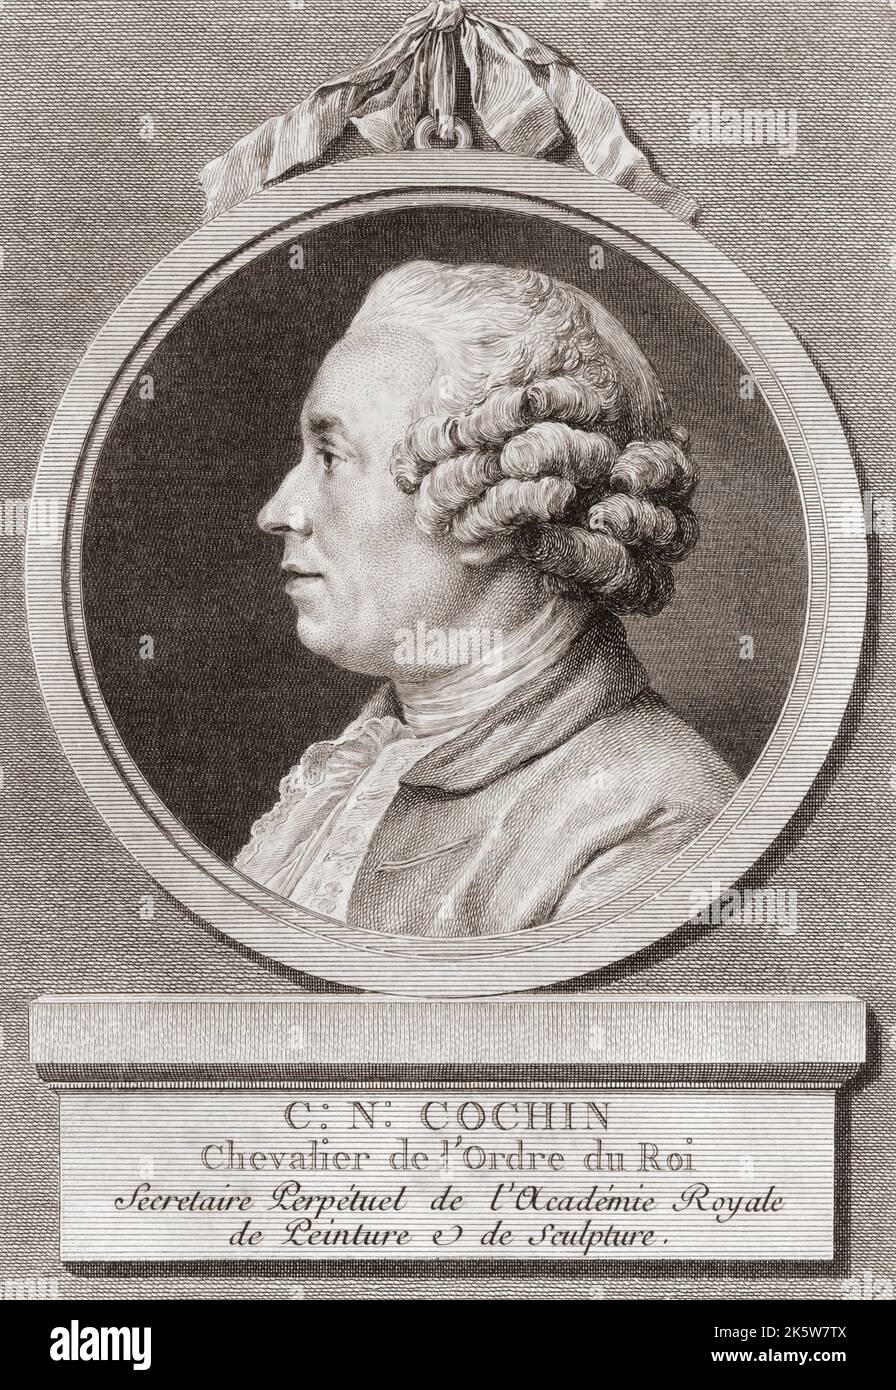 Charles-Nicolas Cochin, 1715 – 1790.  French engraver and author.  Also known as: Charles-Nicolas Cochin le Jeune (the Younger), Charles-Nicolas Cochin le fils (the son), or Charles-Nicolas Cochin II.  From a print by Augustin de Saint-Aubin after a drawing by Charles Nicolas Cochin II. Stock Photo